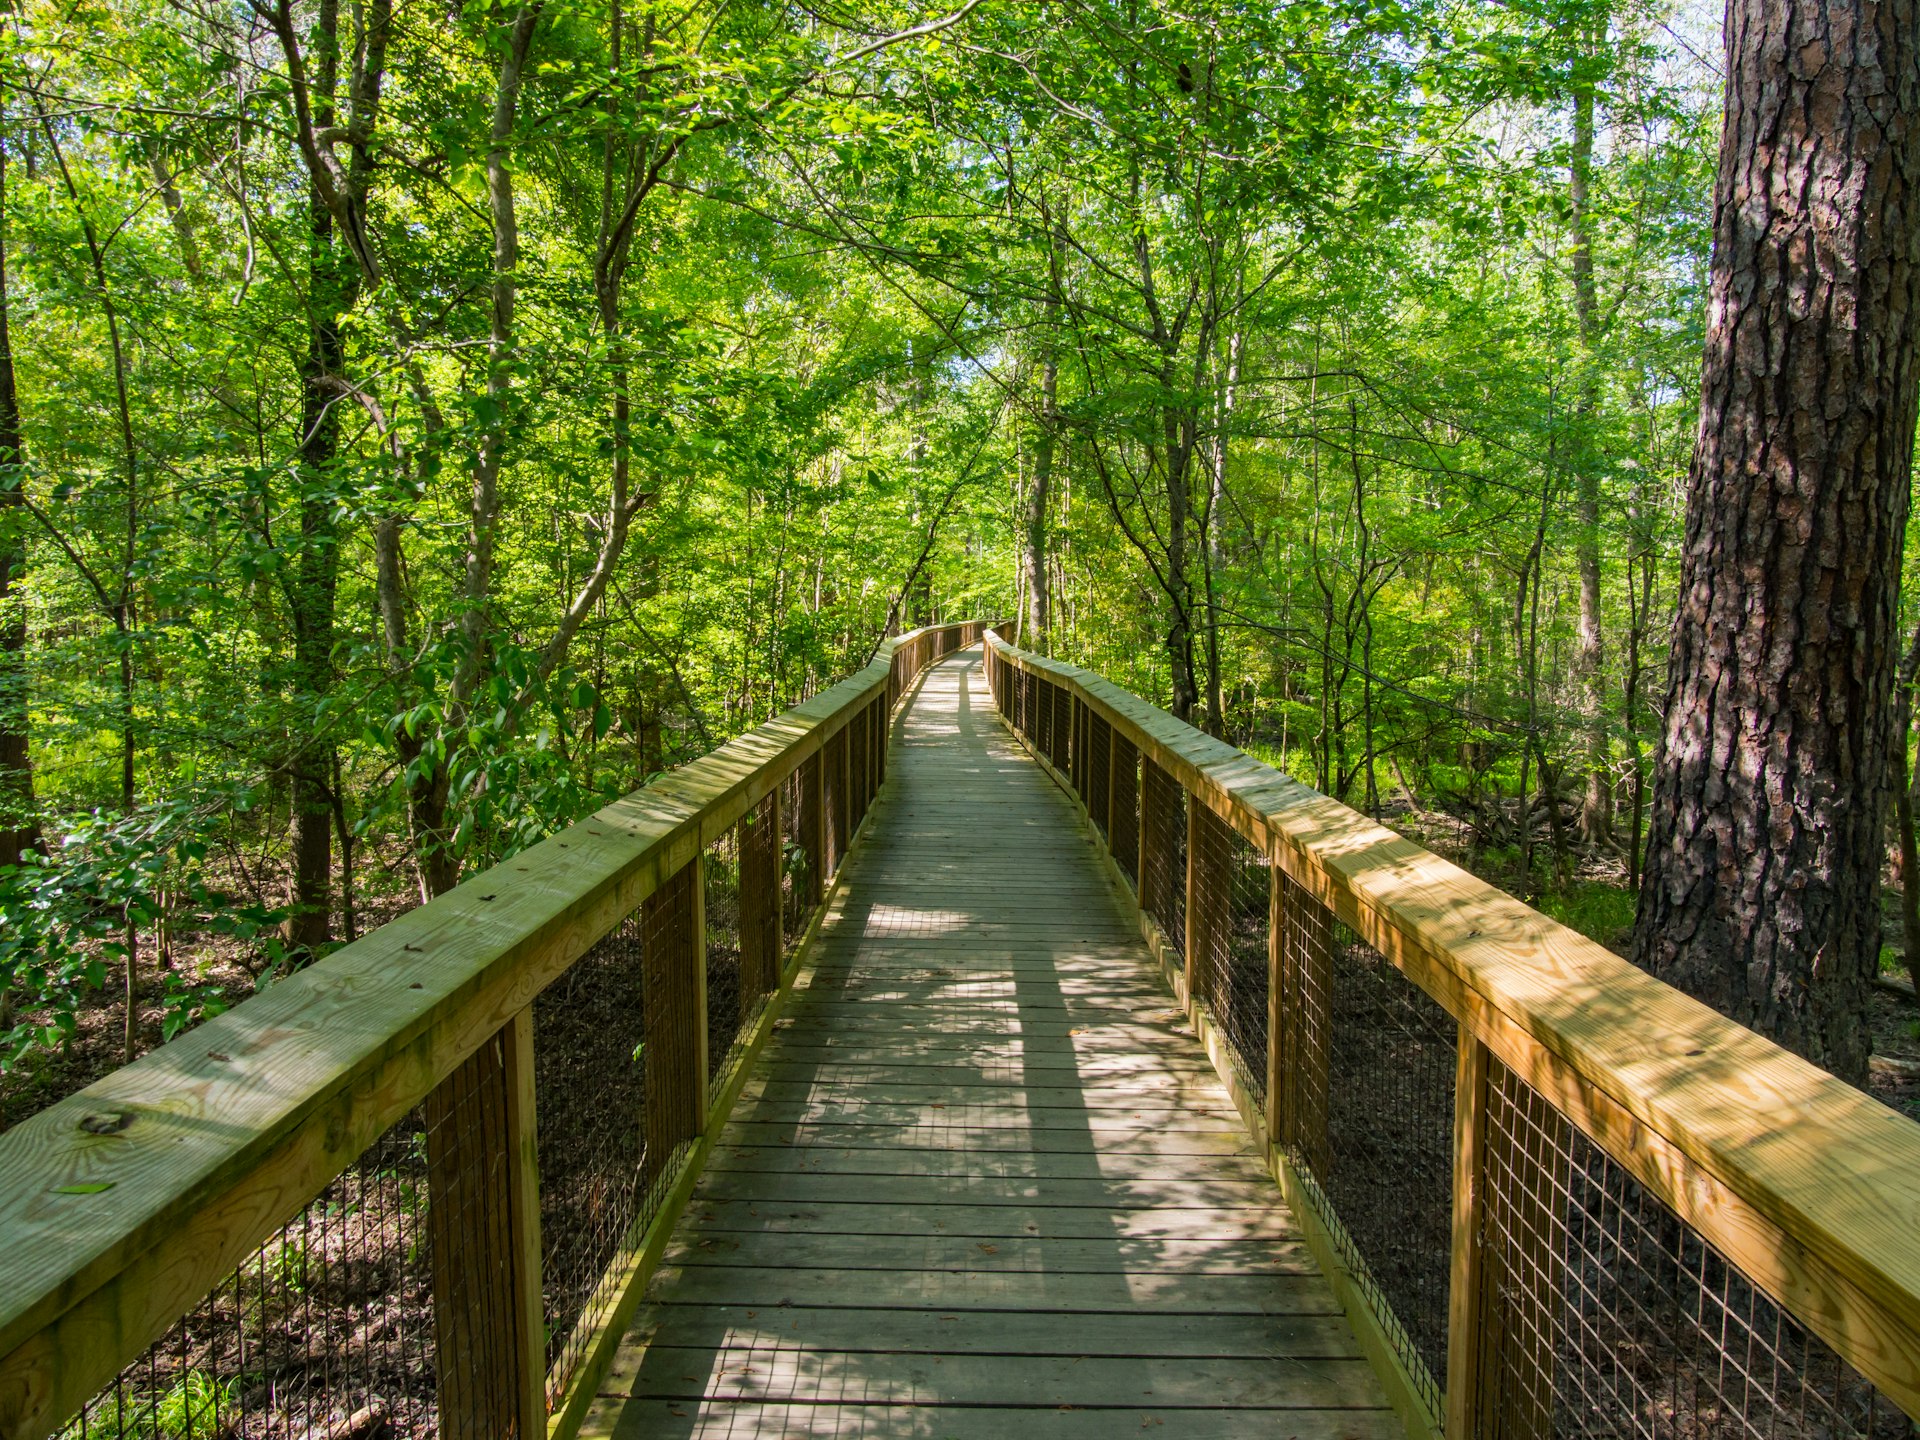 A boardwalk leads the way through dense forest in Congaree National Park